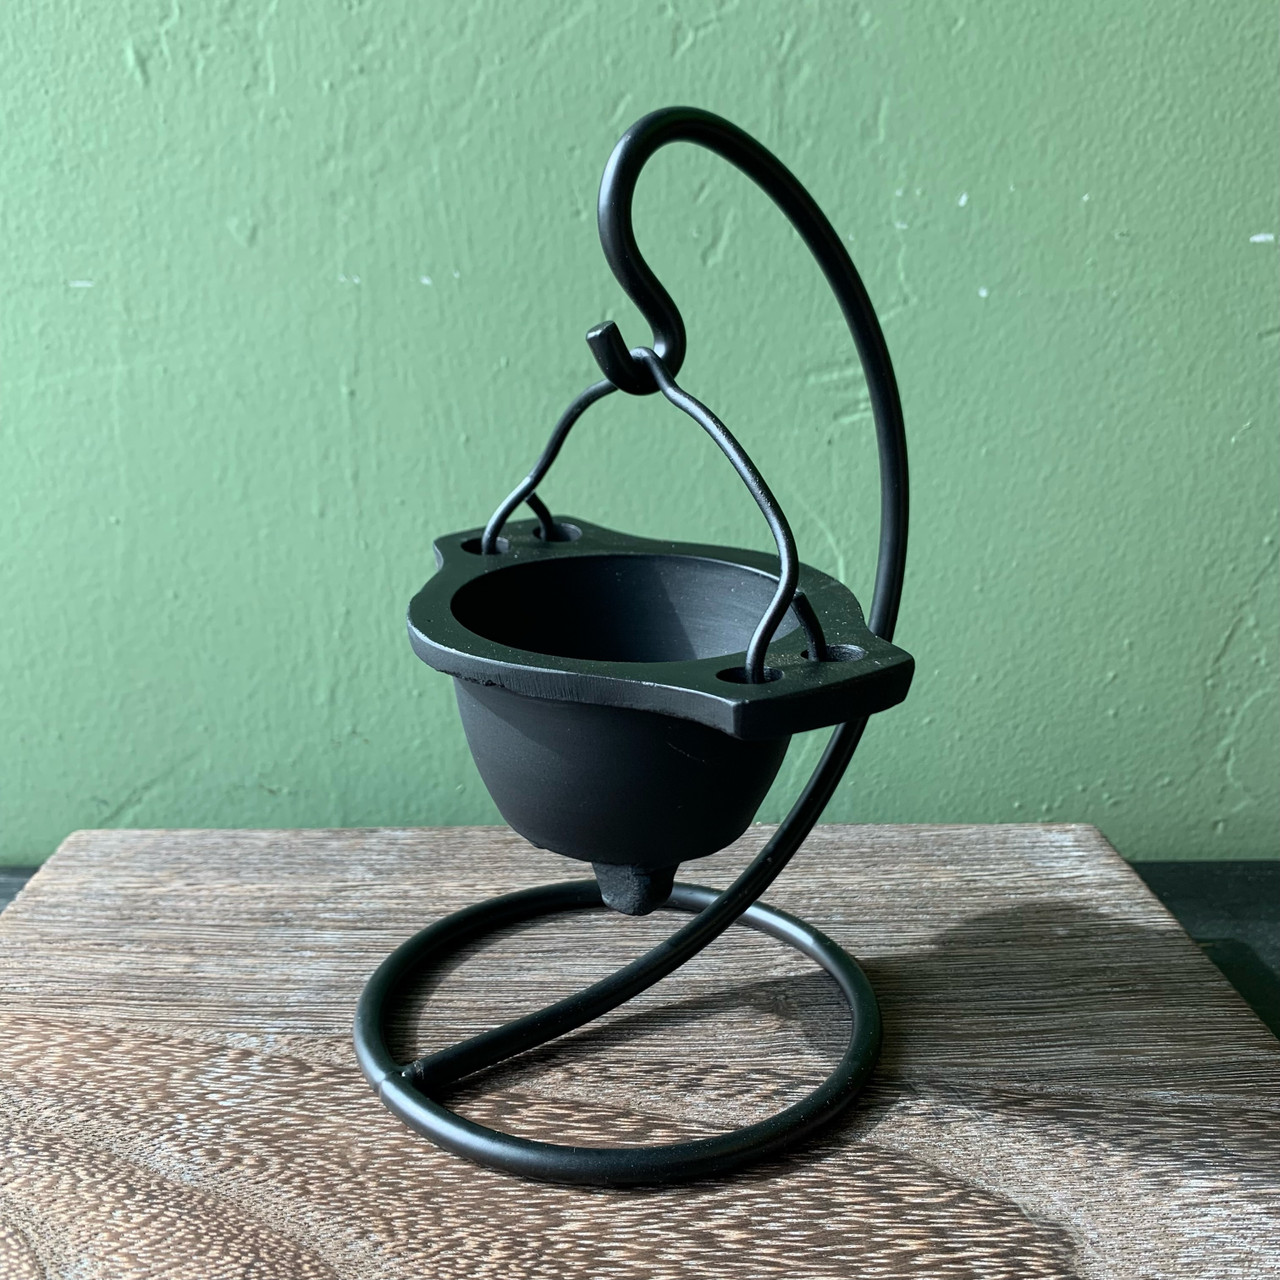 https://cdn11.bigcommerce.com/s-96ymdt5wgw/images/stencil/1280x1280/products/3606/2176/cauldron-with-stand__81934.1681685977.jpg?c=1